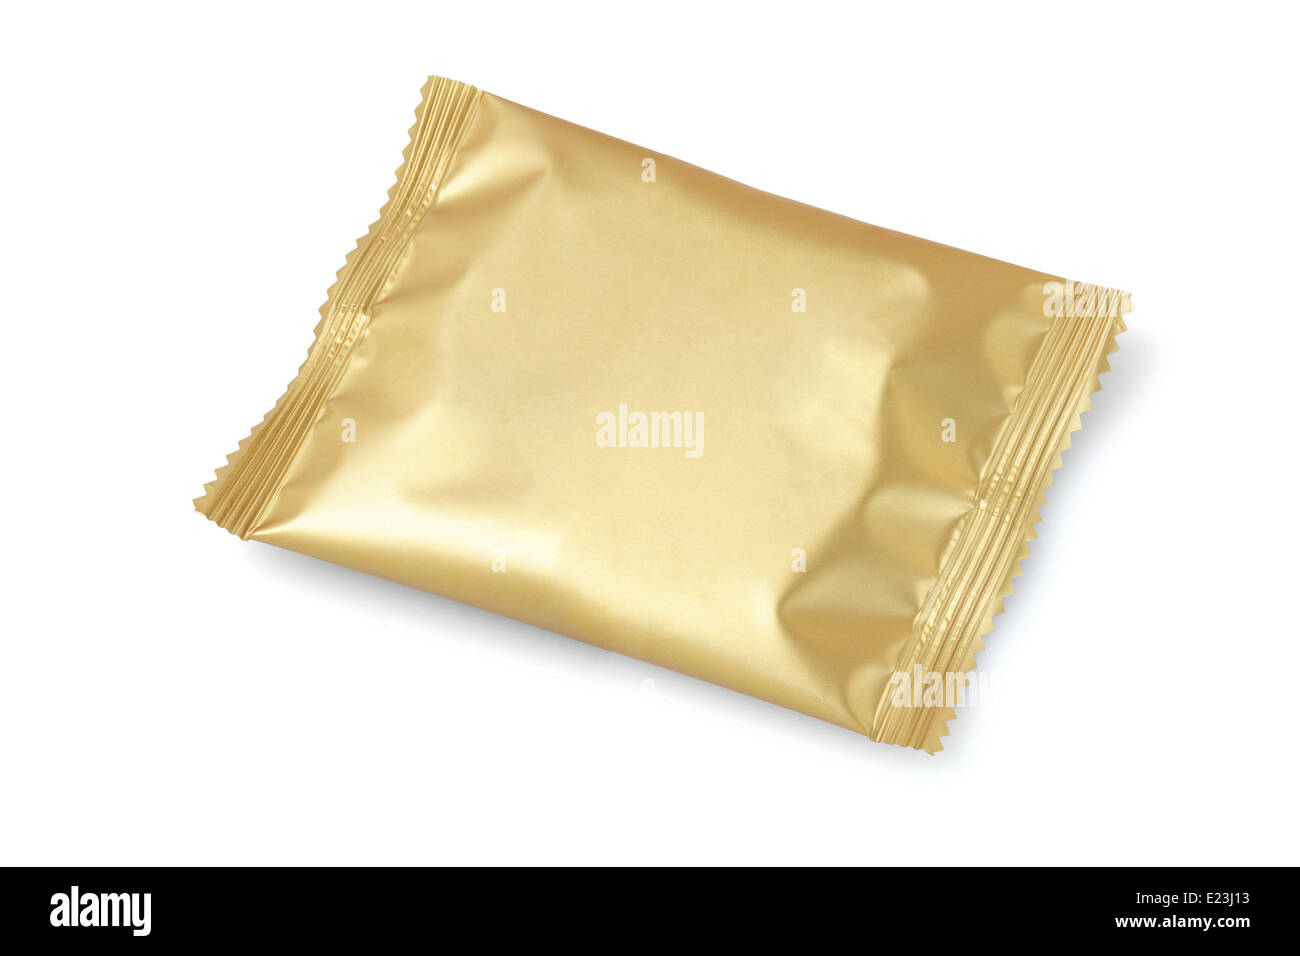 Chocolate Or Cookie In Sealed Wrapper On White Background Stock Photo